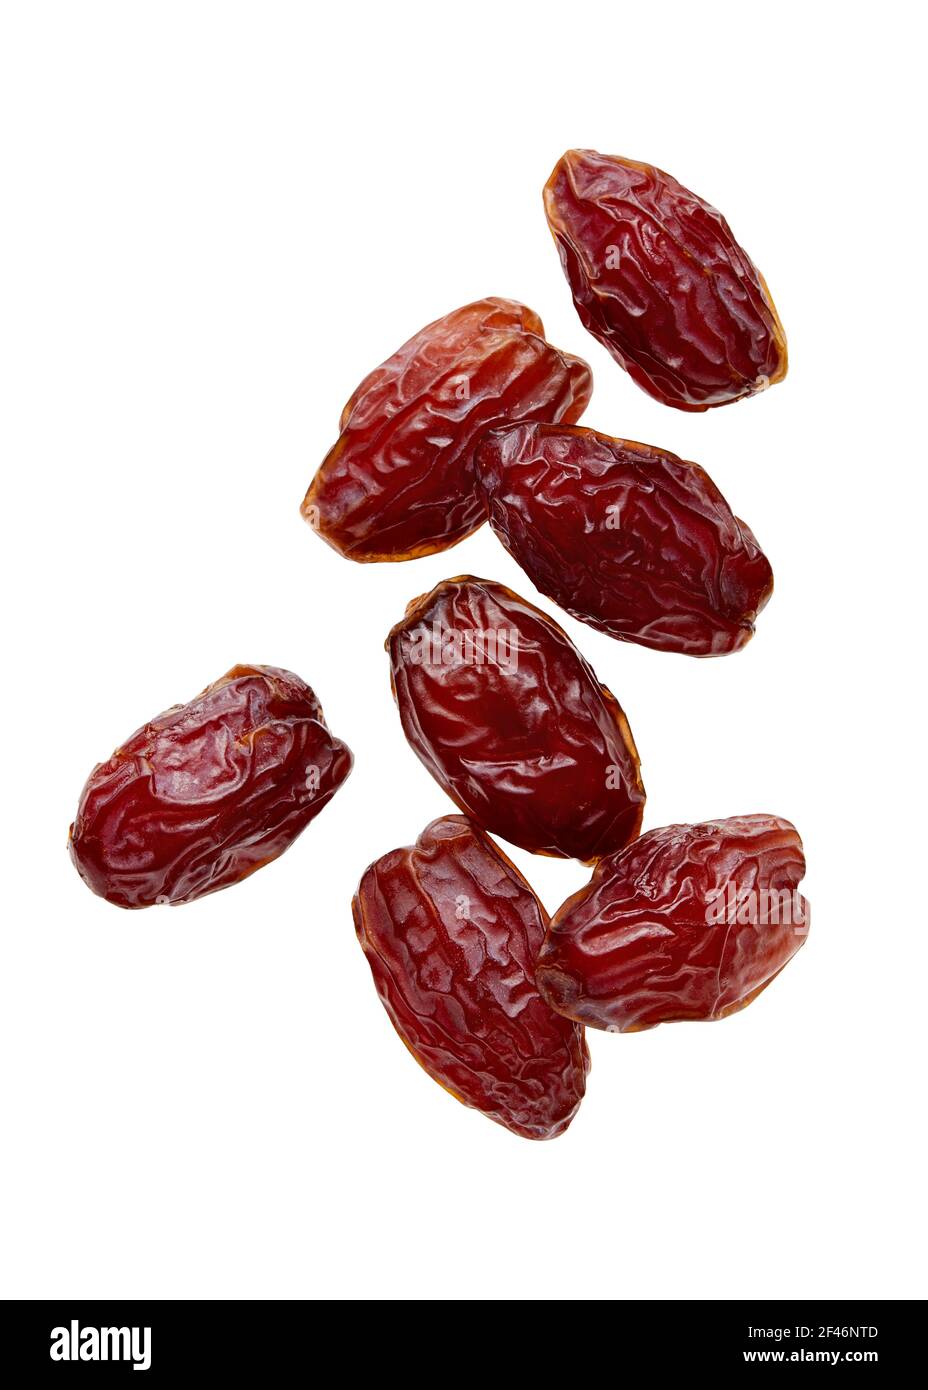 Close up of a dried date fruit over a white background. Stock Photo